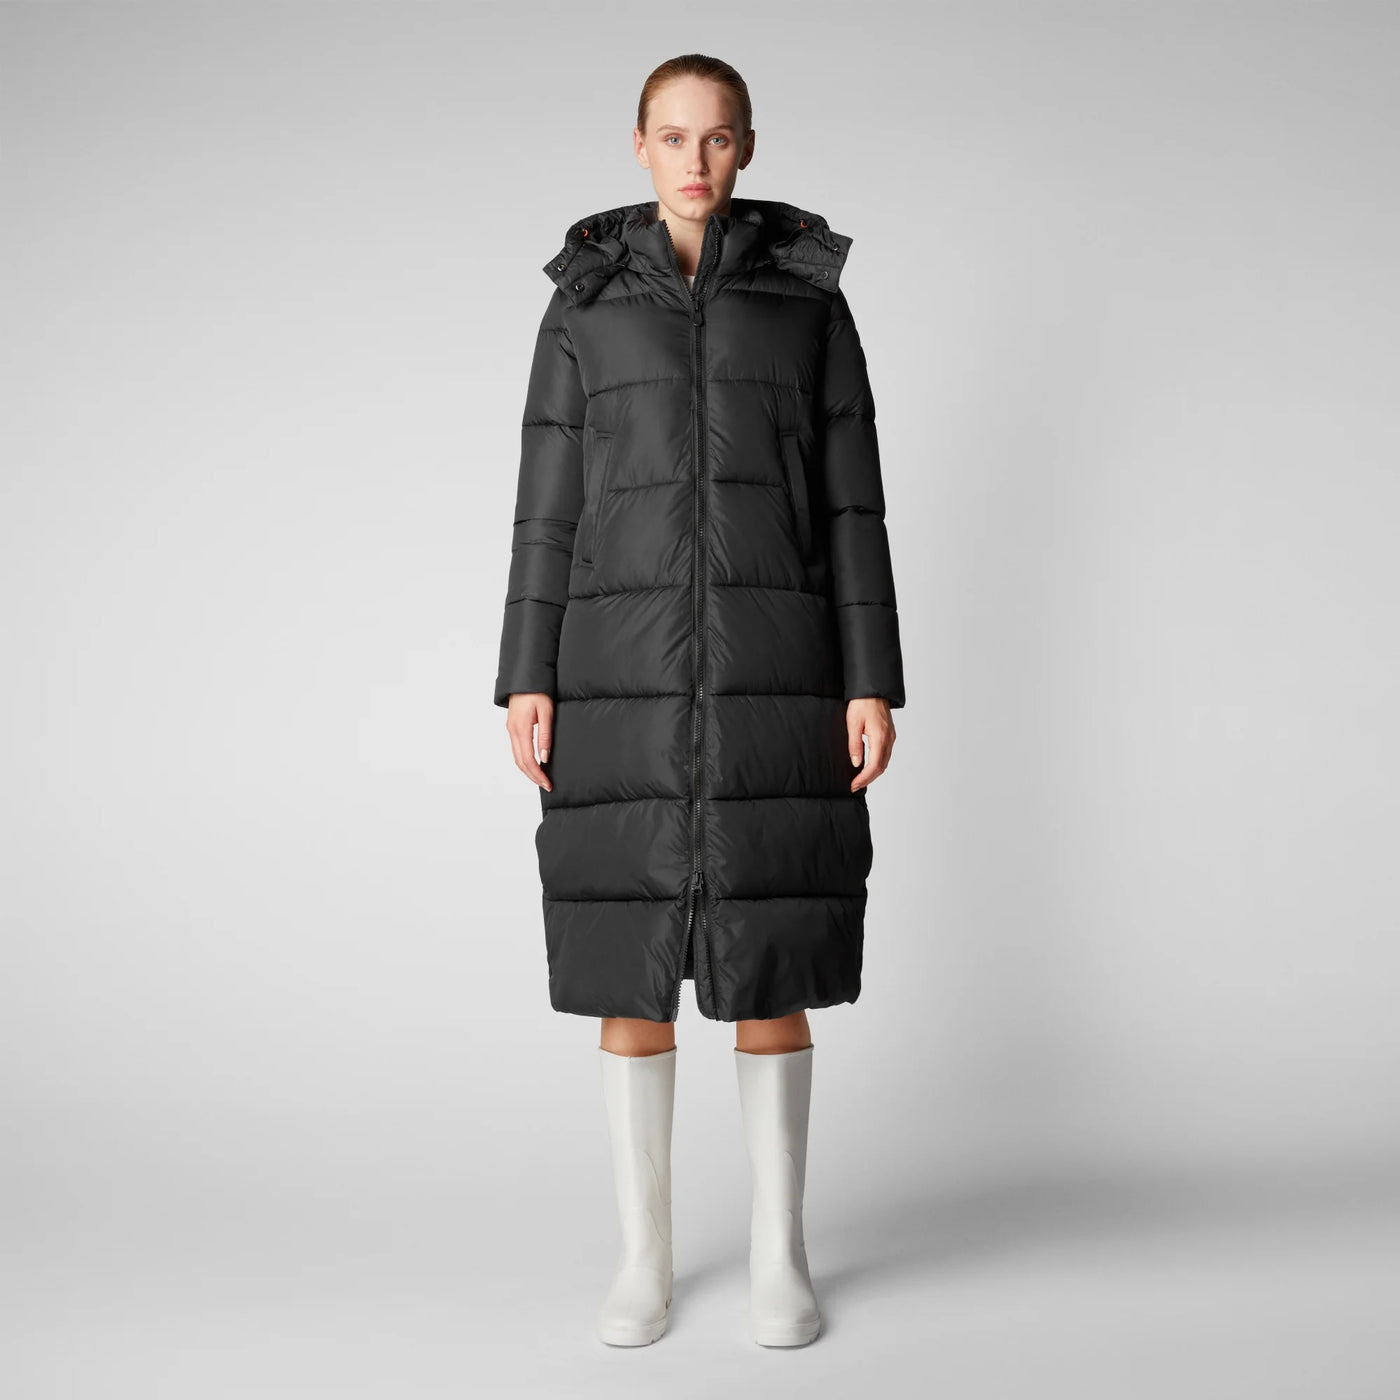 COLETTE HOODED PUFFER JACKET